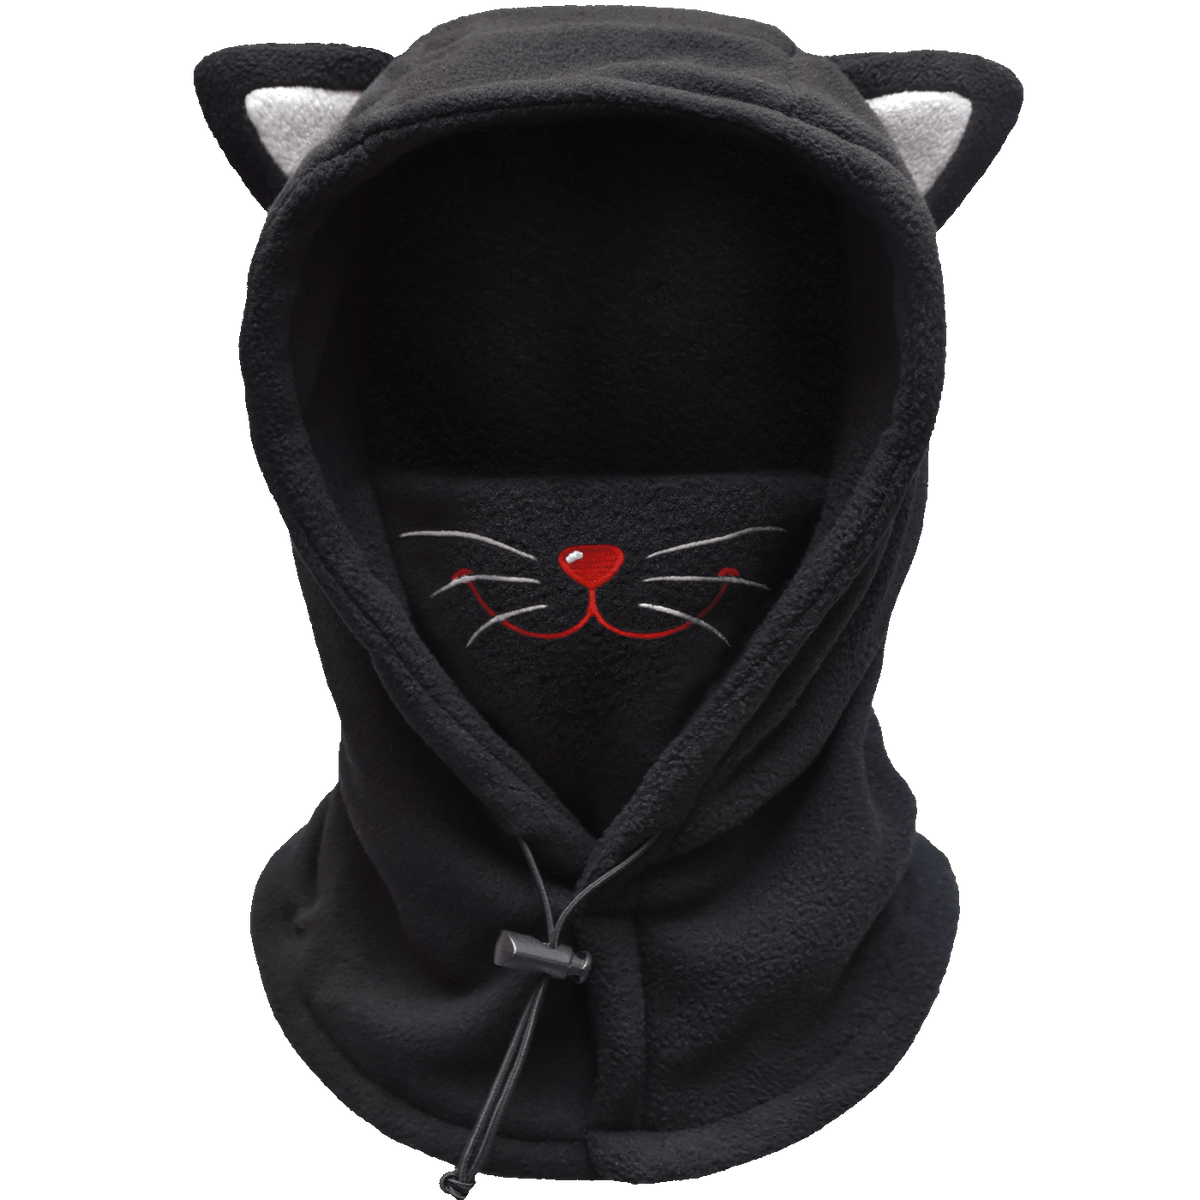 Kids Balaclava Ski Mask, Washable Fleece Winter Hat with Face Cover for Windproof, Cat